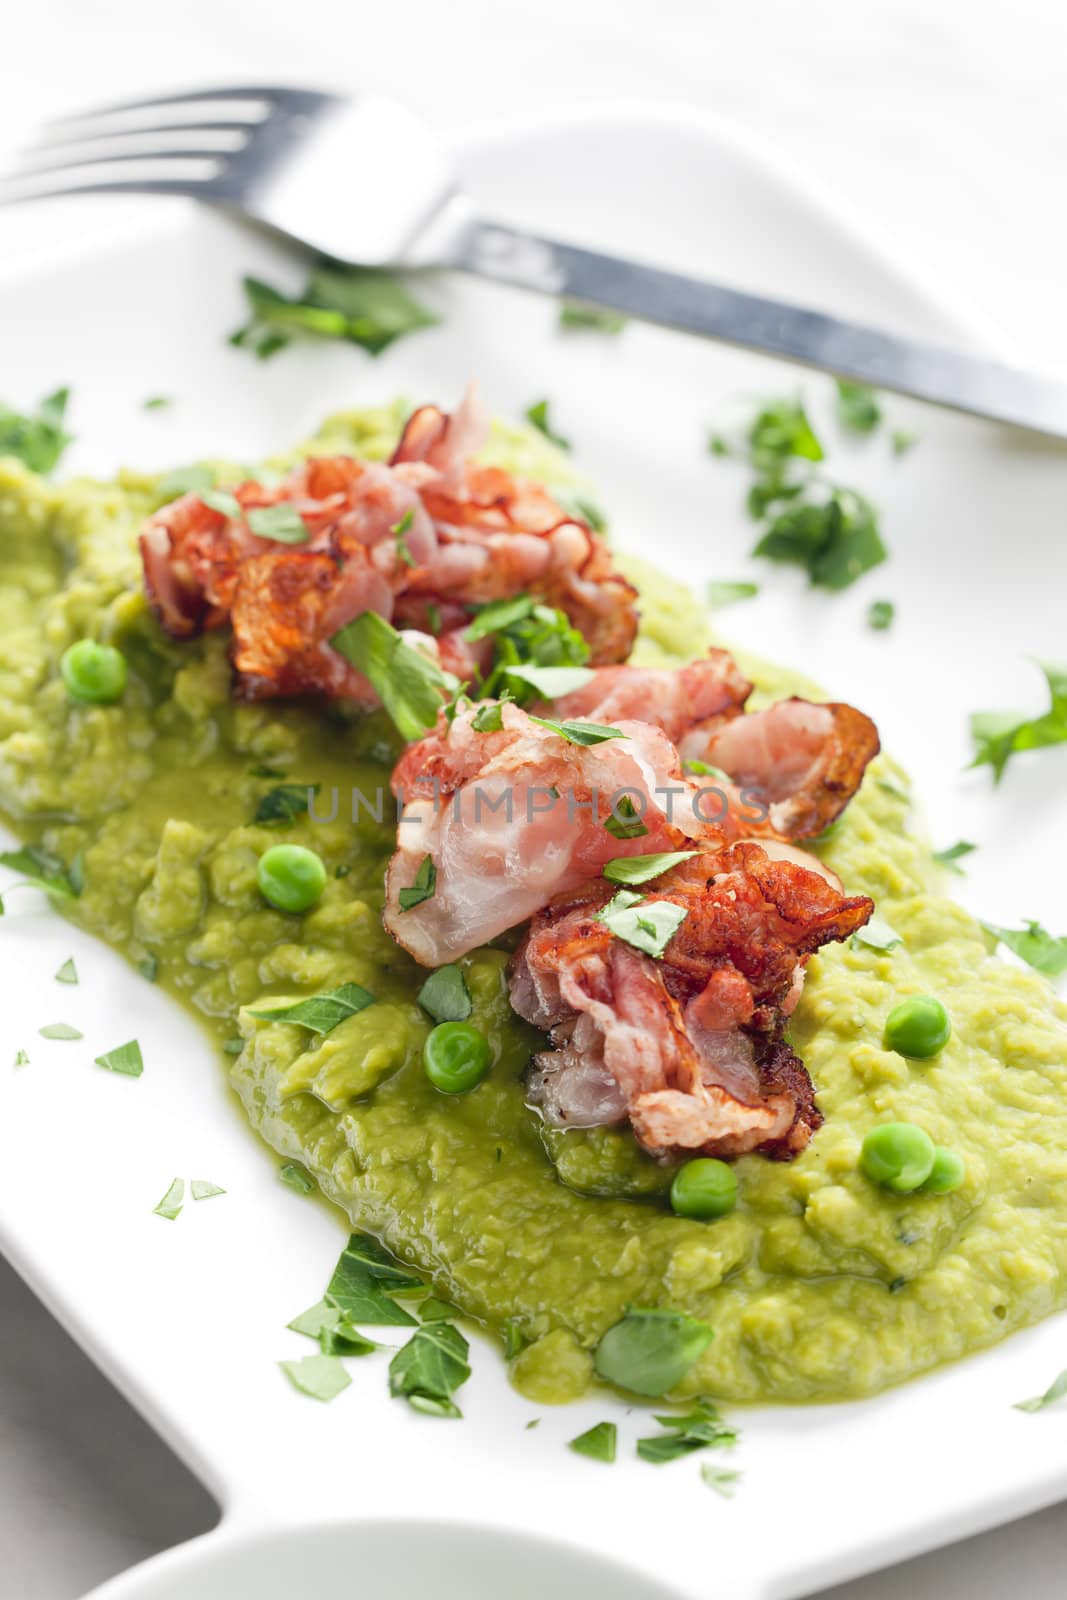 mashed peas with fried pancetta by phbcz